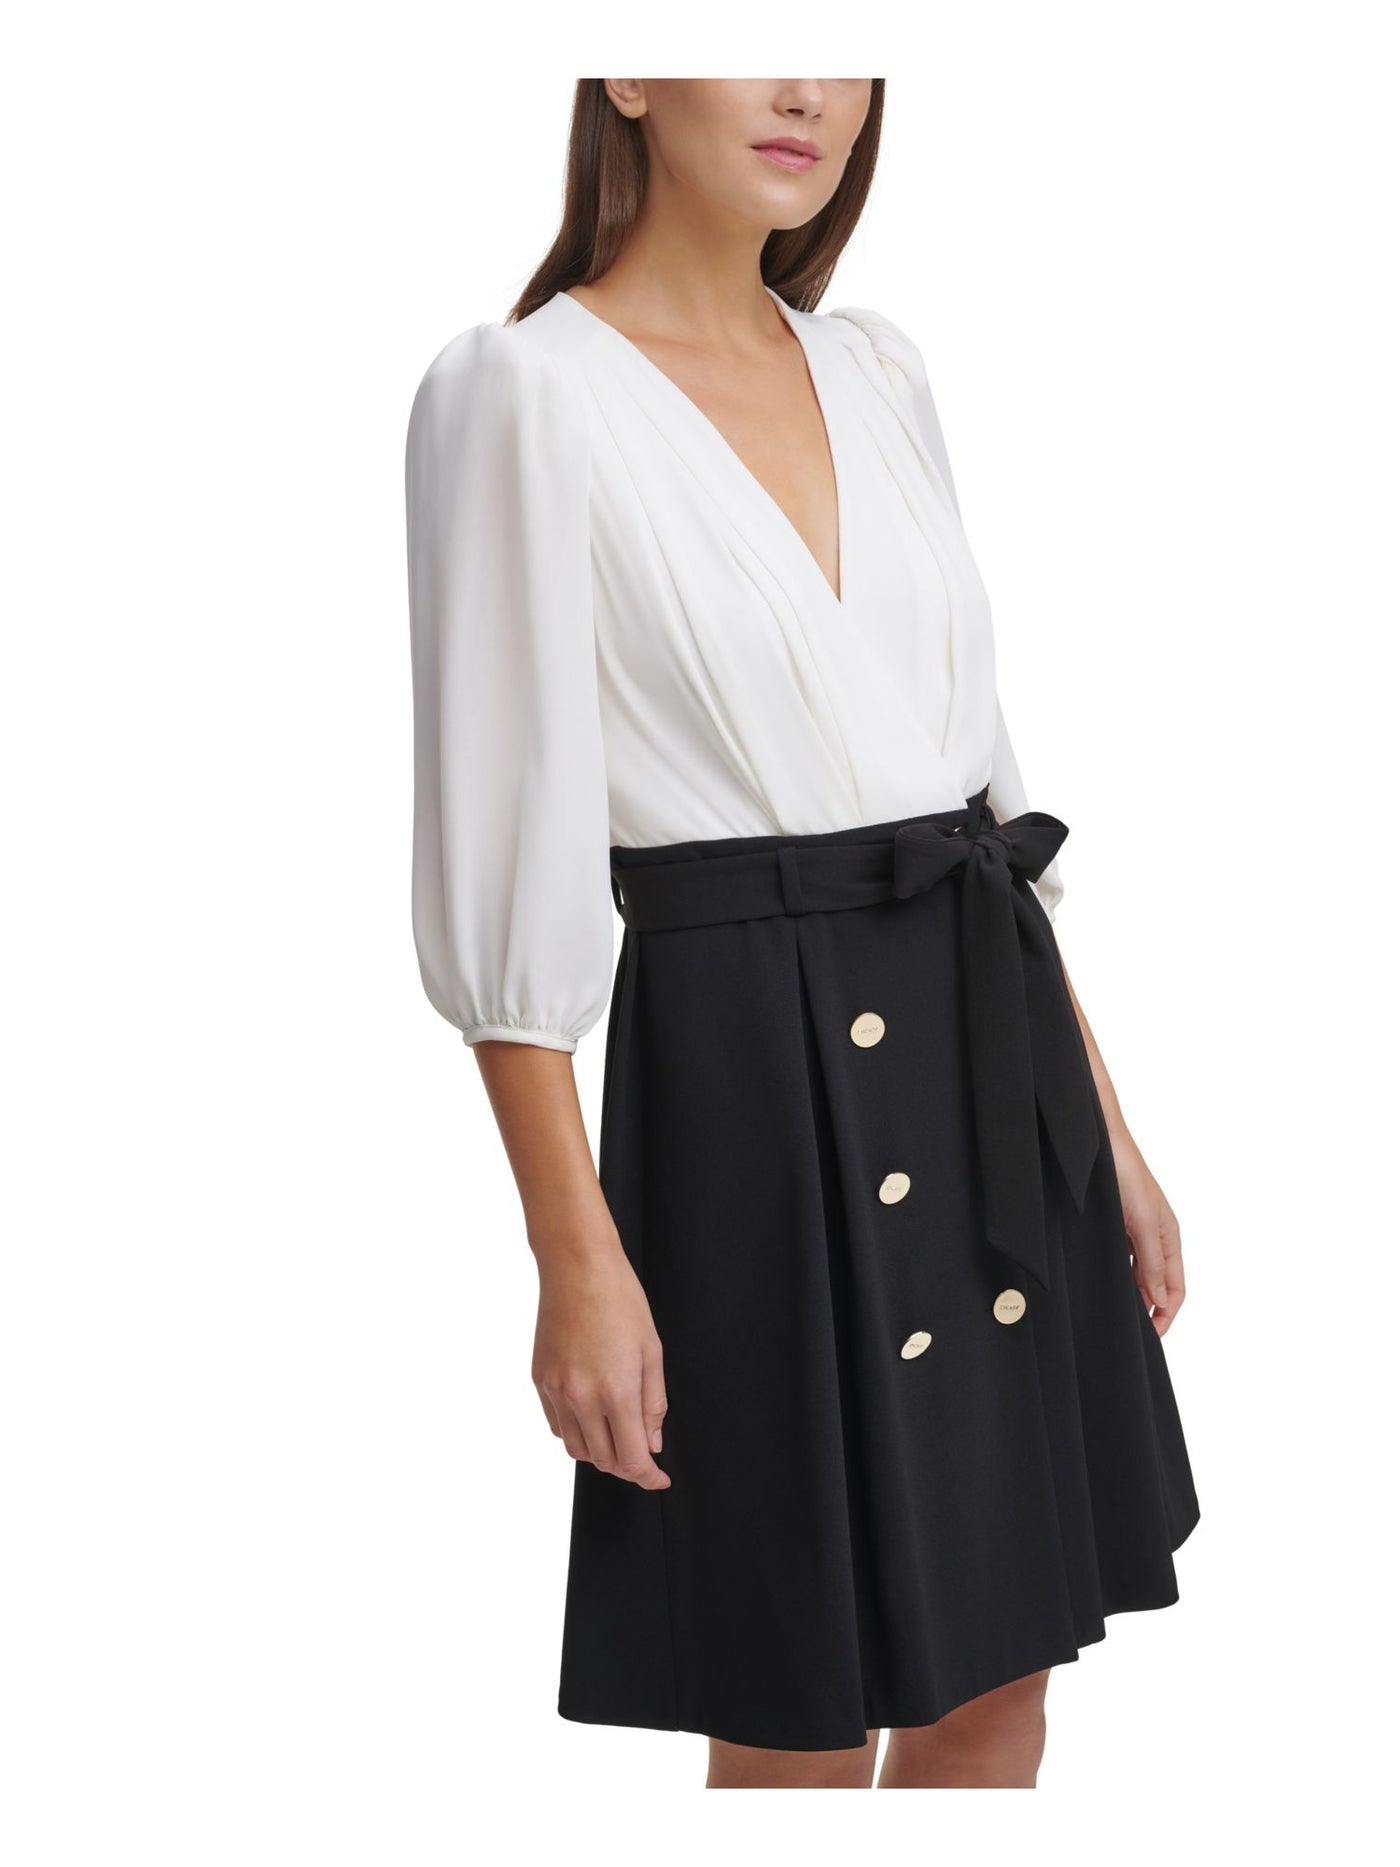 DKNY Womens Black Belted Embellished Balloon Sleeve Surplice Neckline Above The Knee Wear To Work Fit + Flare Dress 8